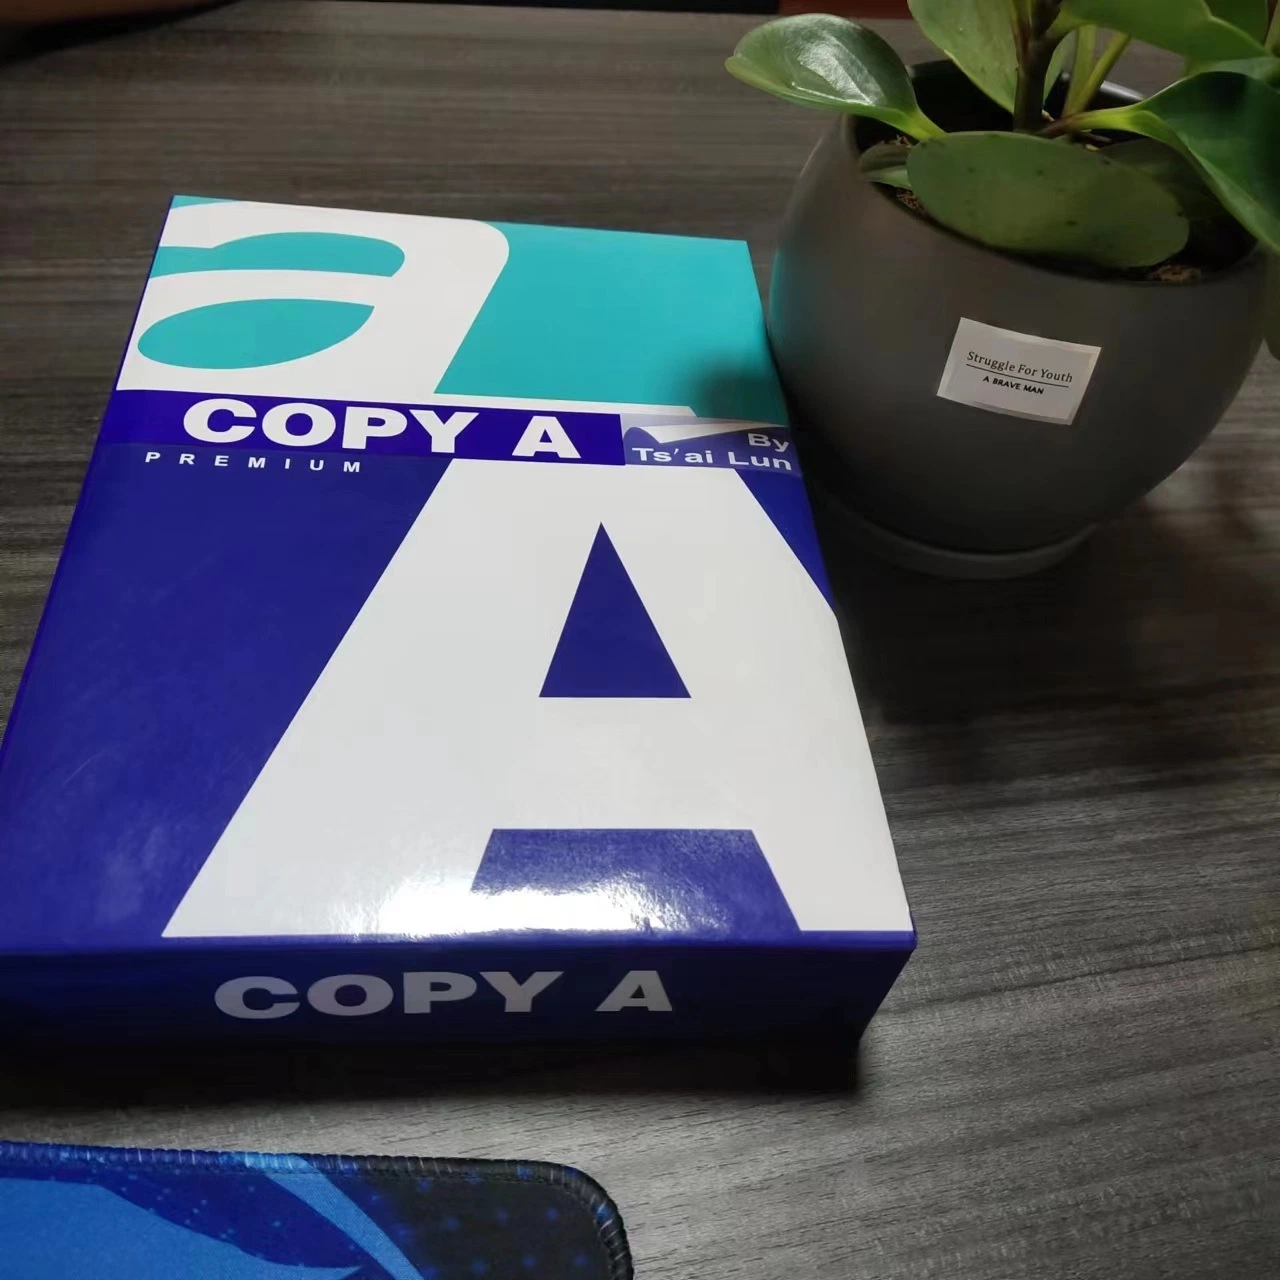 Double A4 Copy Paper A4 80 GSM, 75 GSM, 70 GSM 500 Sheets